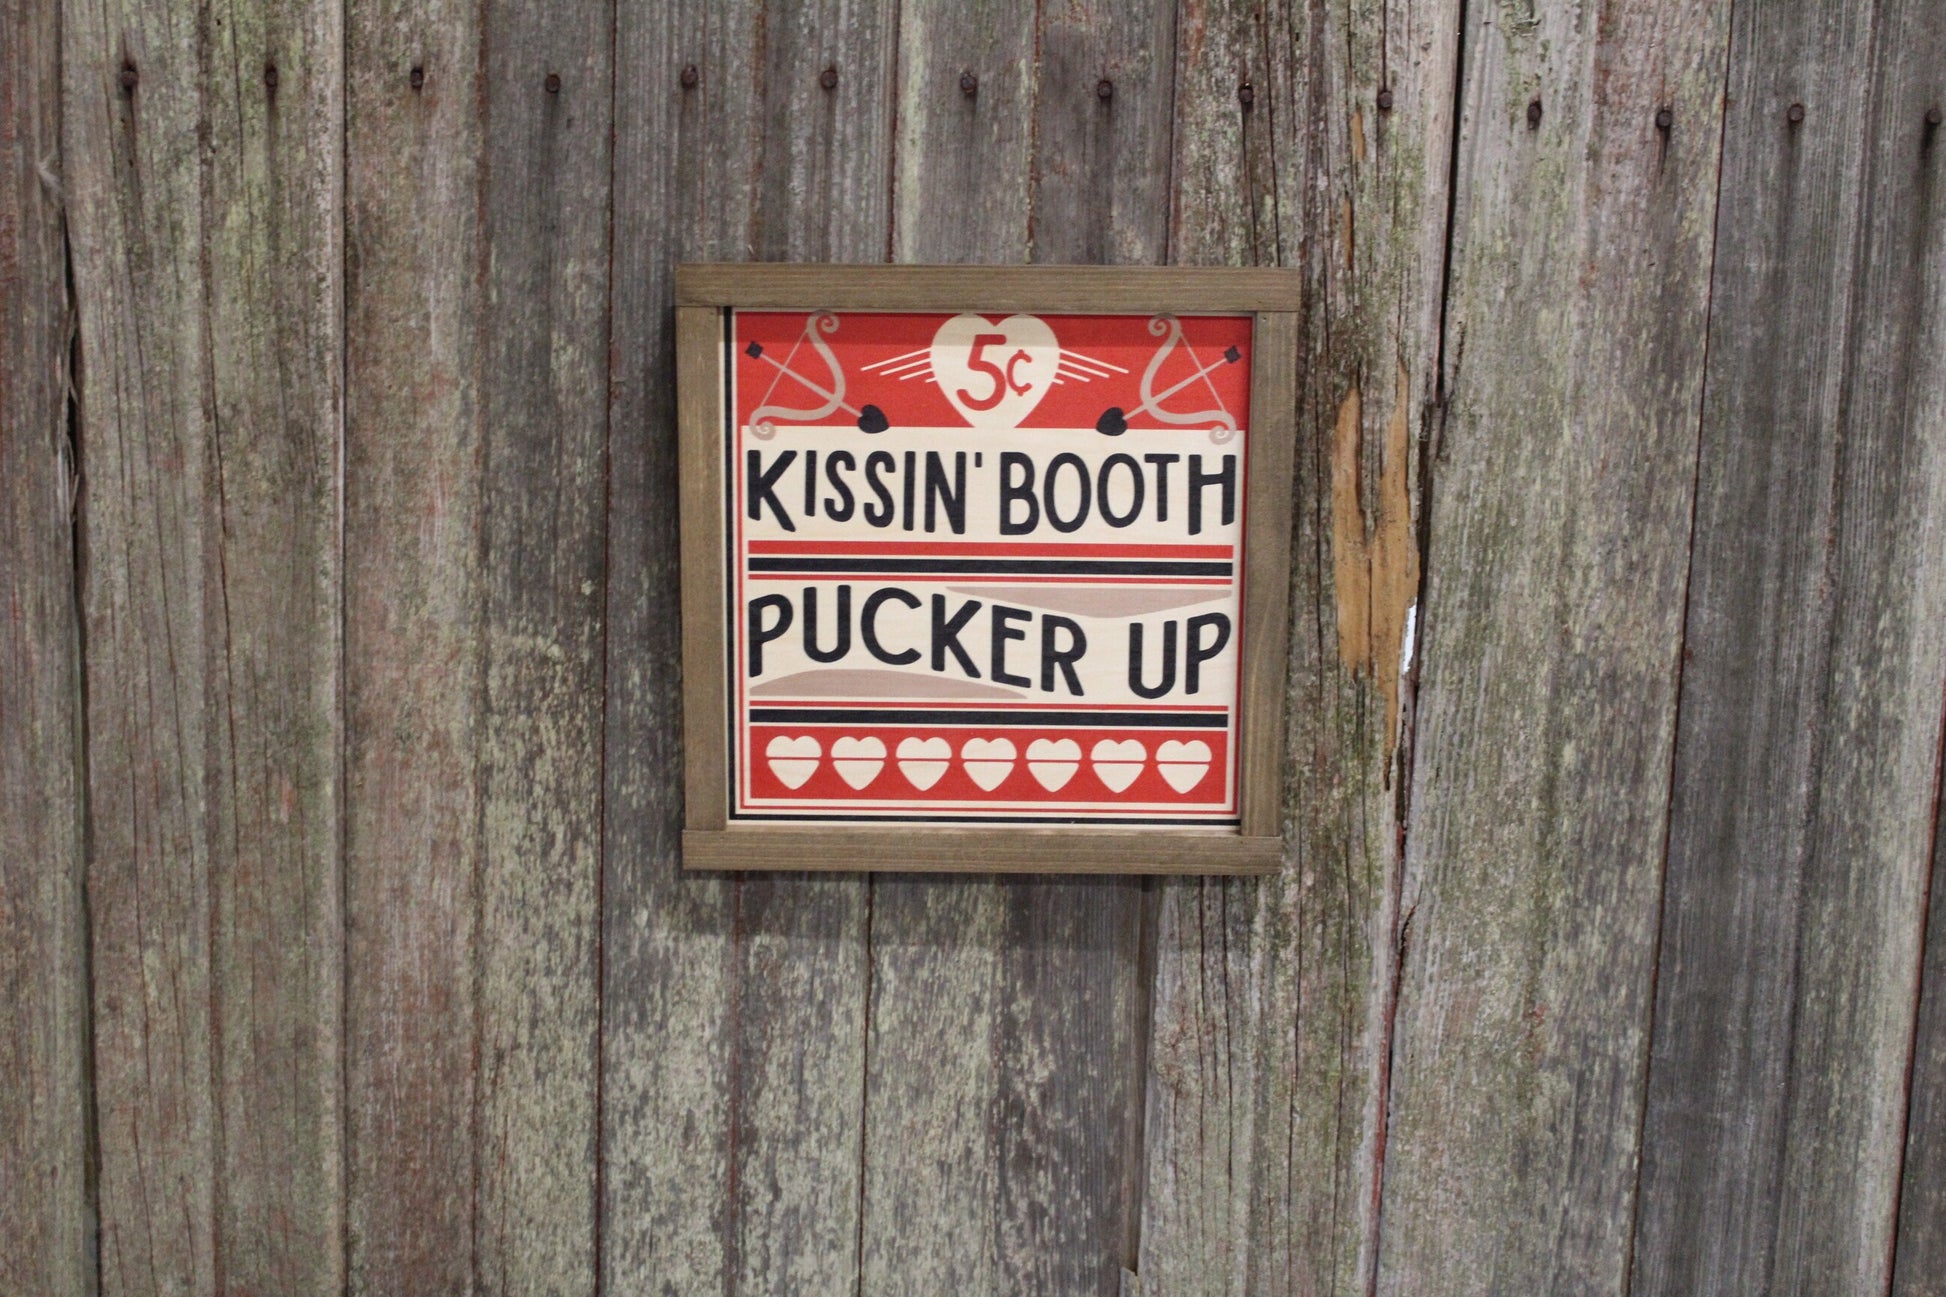 Kissin' Booth Wood Sign Pucker Up Valentines Day Hearts Red Love Kissing Brown Framed Print Wall Art Farmhouse Primitive Rustic Cupids Arrow